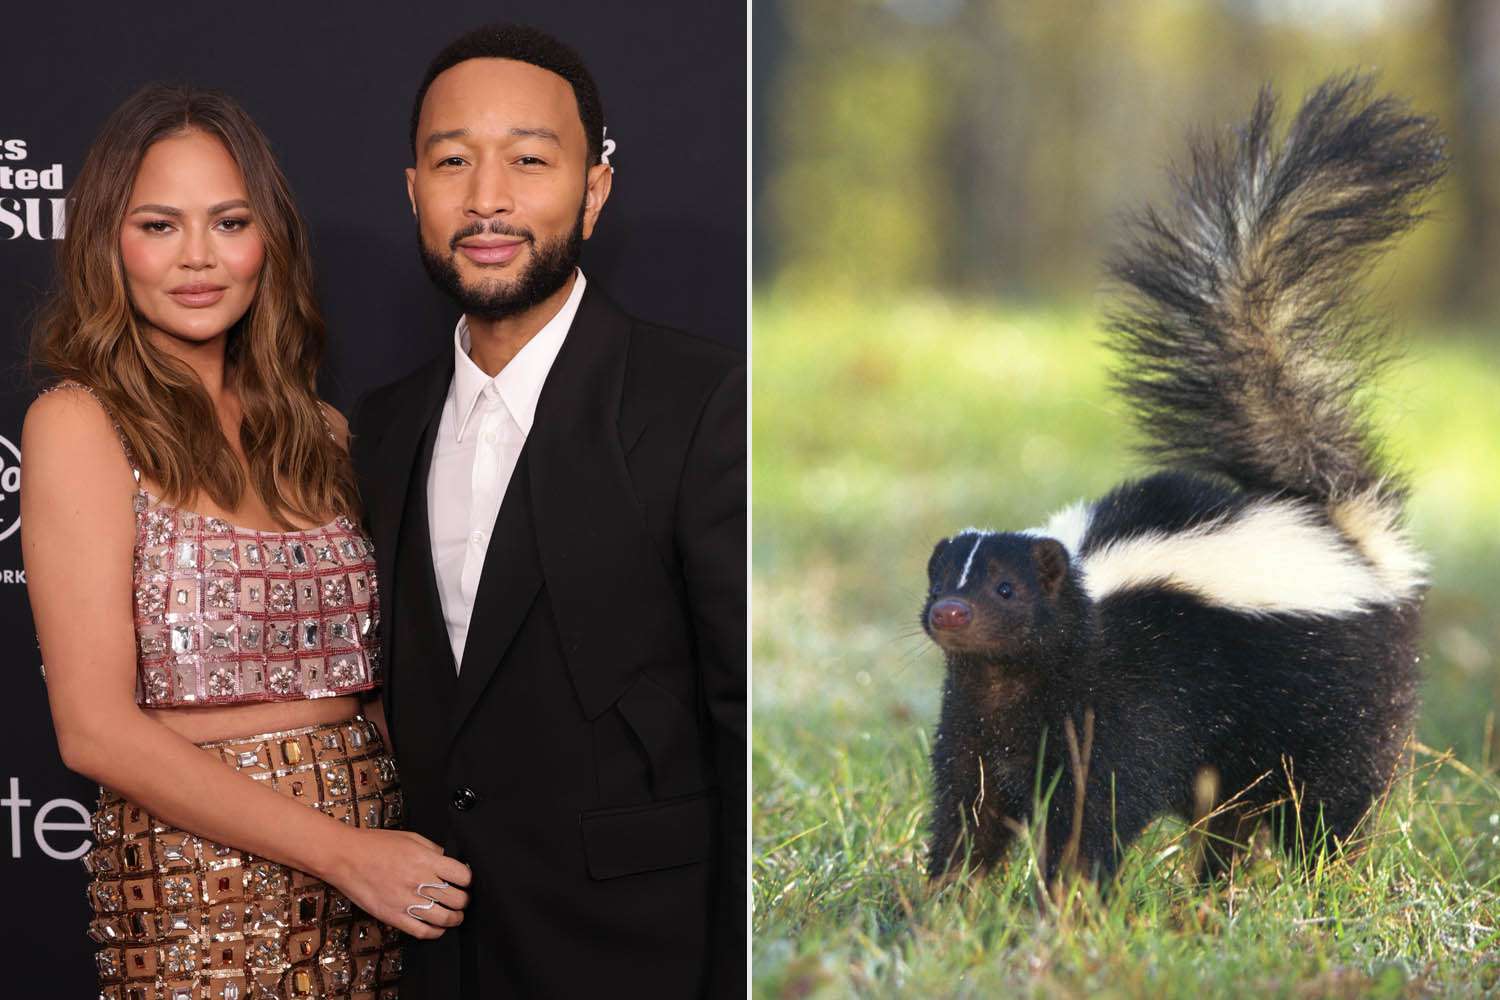 Chrissy Teigen and John Legend Reveal a Skunk Filled Their Home with a ‘Stench’: ‘Oh, It’s Bad!’